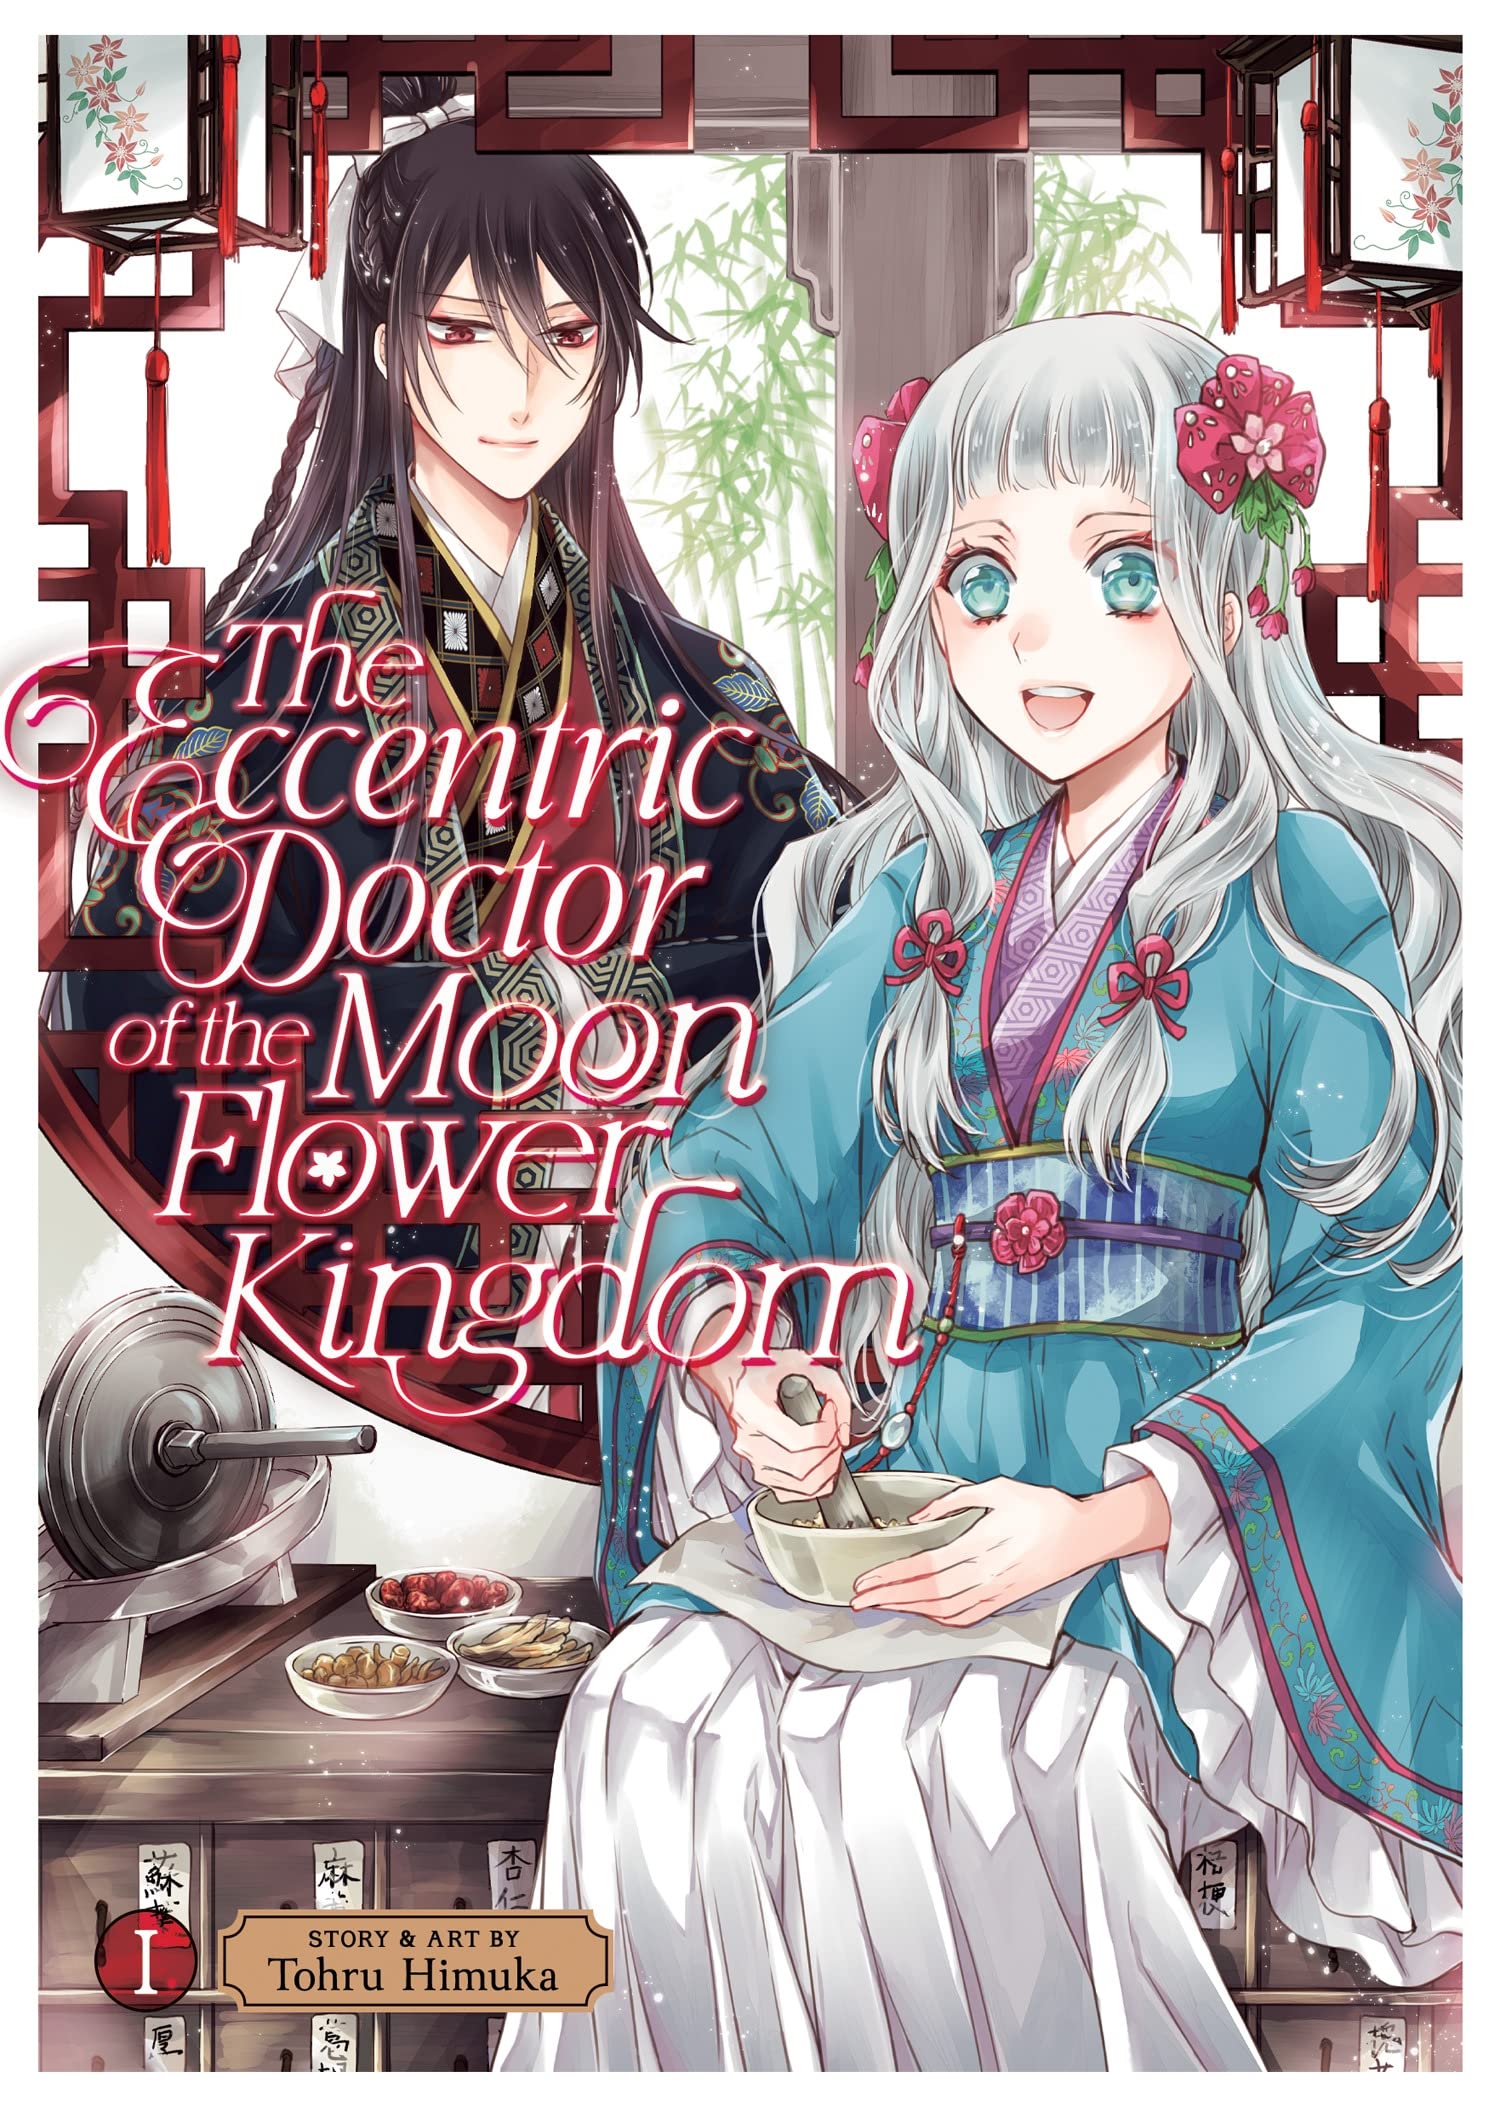 The Eccentric Doctor of the Moon Flower Kingdom Vol. 01